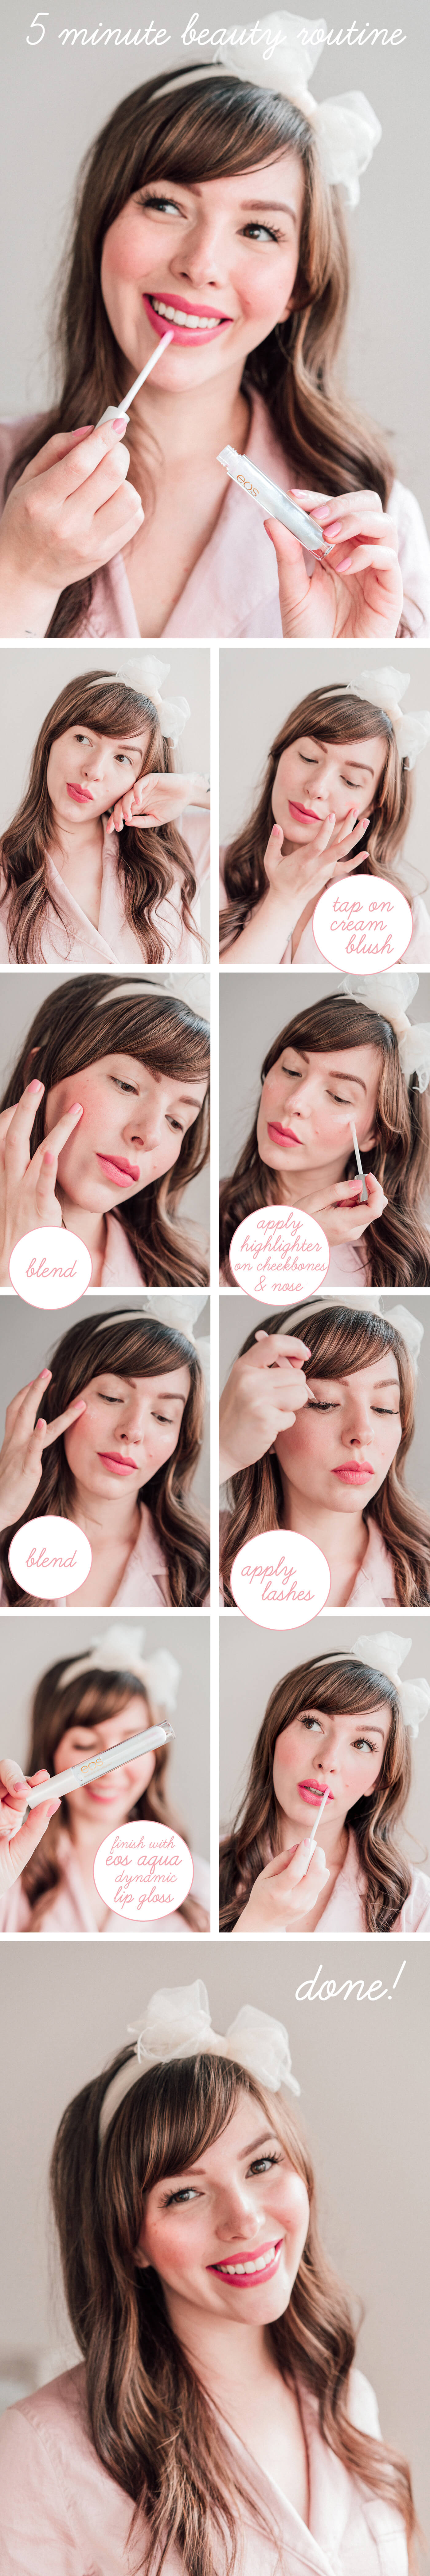 5 minute beauty routine tutorial with eos